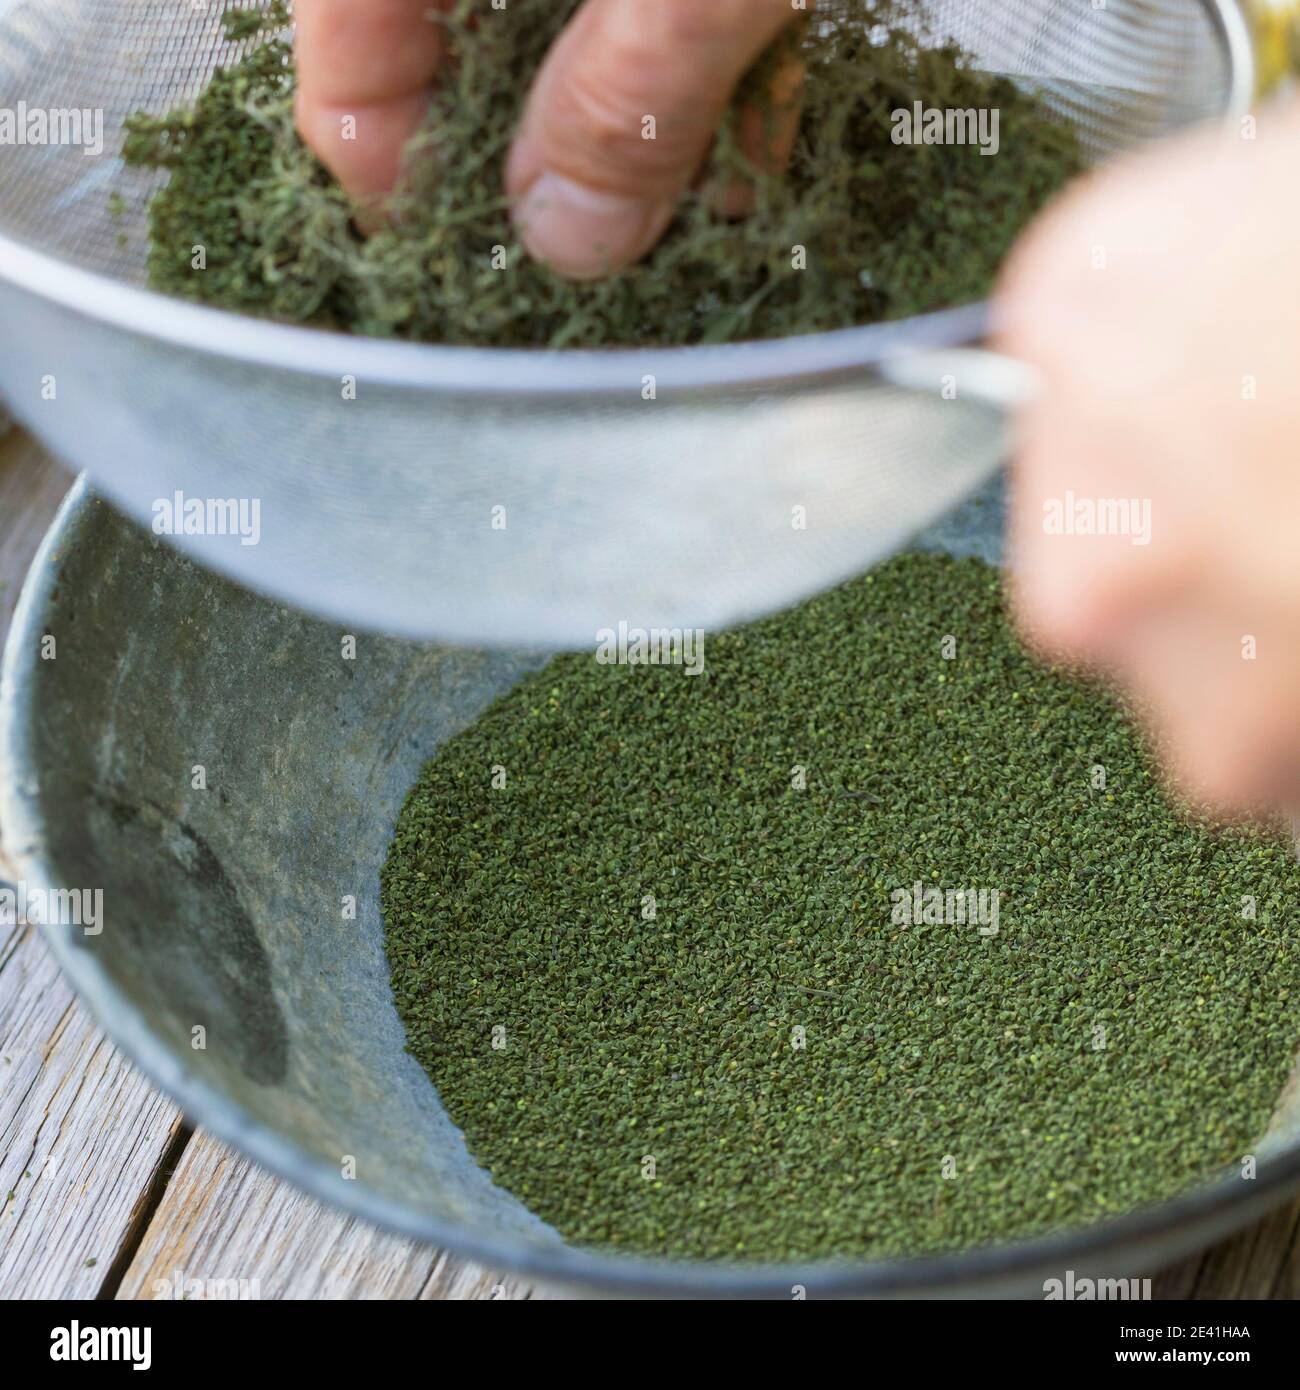 stinging nettle (Urtica dioica), dried seeds are sifted through a kitchen sieve, cleaned, Germany Stock Photo